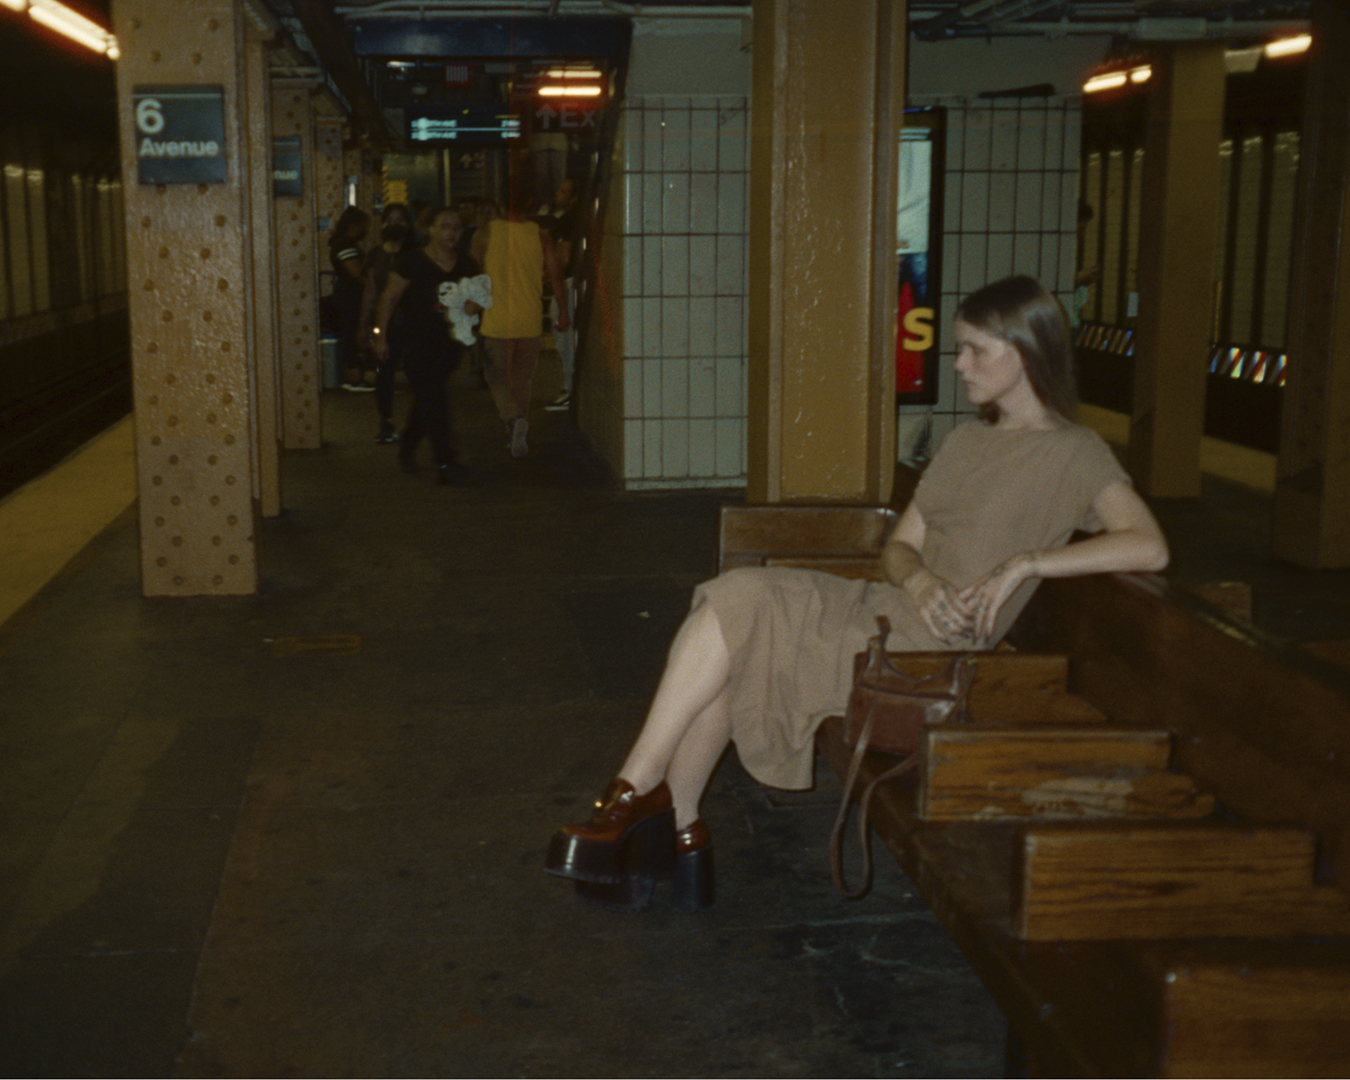 Ethel Cain sitting on a wooden bench in a subway station in a photograph by Silken Weinberg featured in i-D’s The Royalty Issue, no. 370, Winter 2022